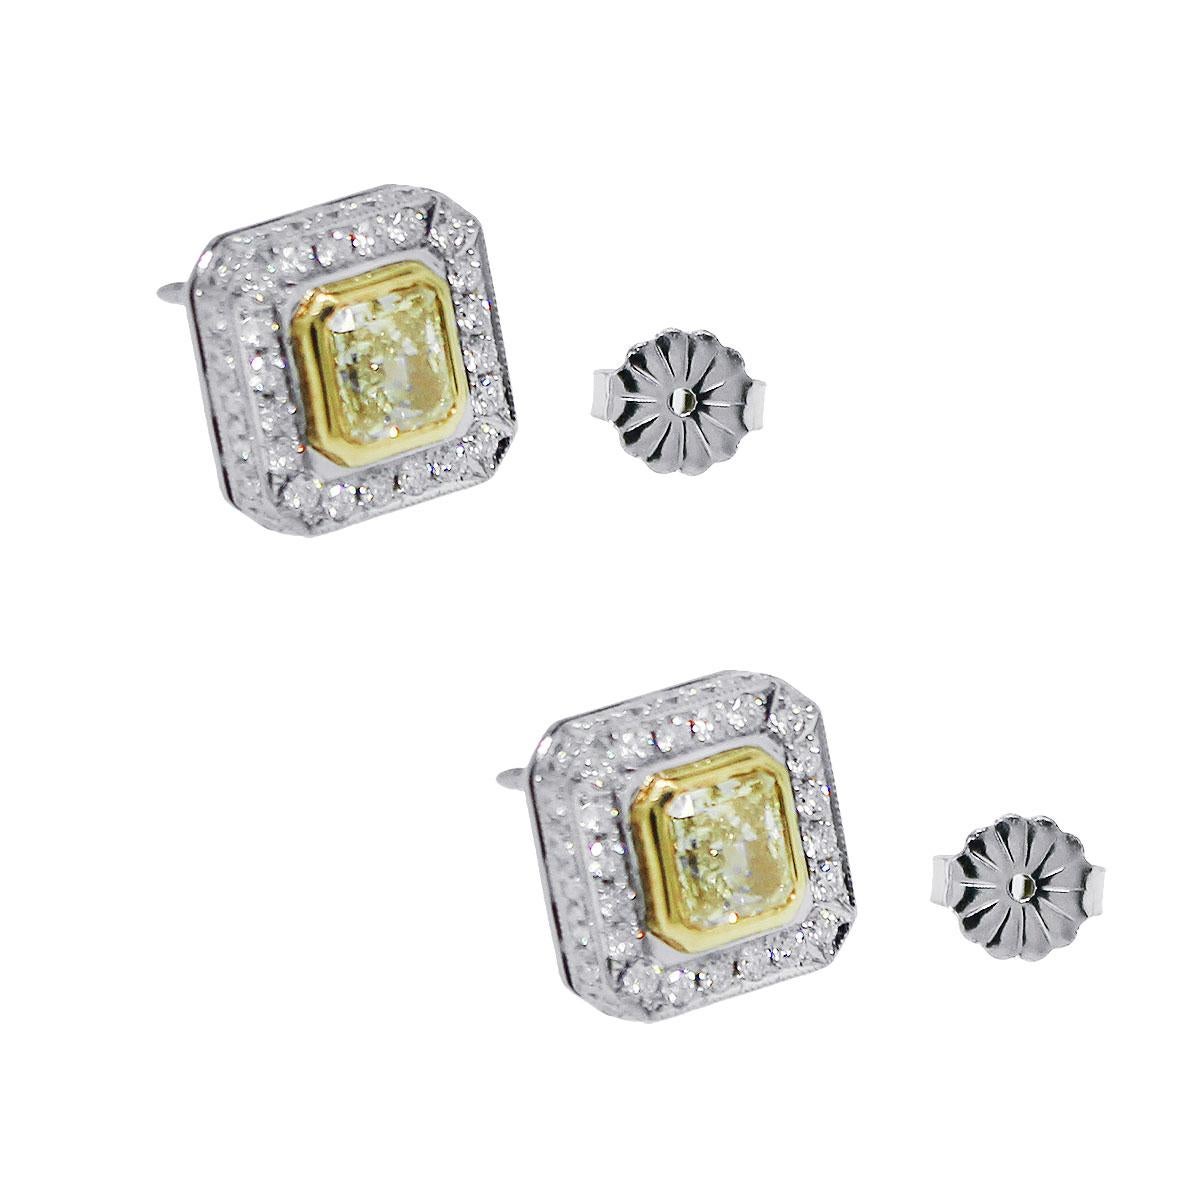 Material: 18k Two Tone Gold
Diamond Details: Approximately 0.90ctw yellow diamonds and 0.60ctw white diamonds. Total 1.50ctw. Diamonds are H in color and SI in clarity.
Clasps: Post Friction backs
Total Weight: 7.3g (4.7dwt)
Measurements: 0.43